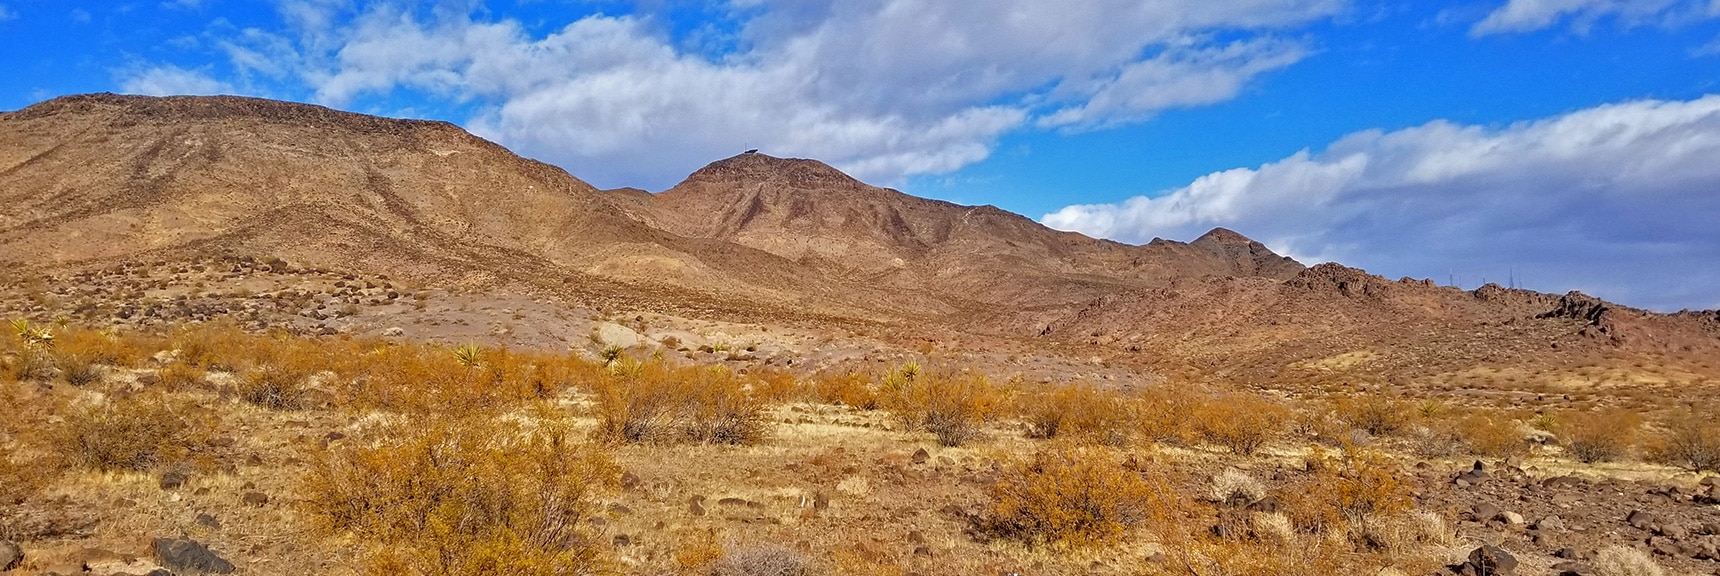 Winding Among the Many High Points Along the McCullough Hills Trail| McCullough Hills Trail in Sloan Canyon National Conservation Area, Nevada